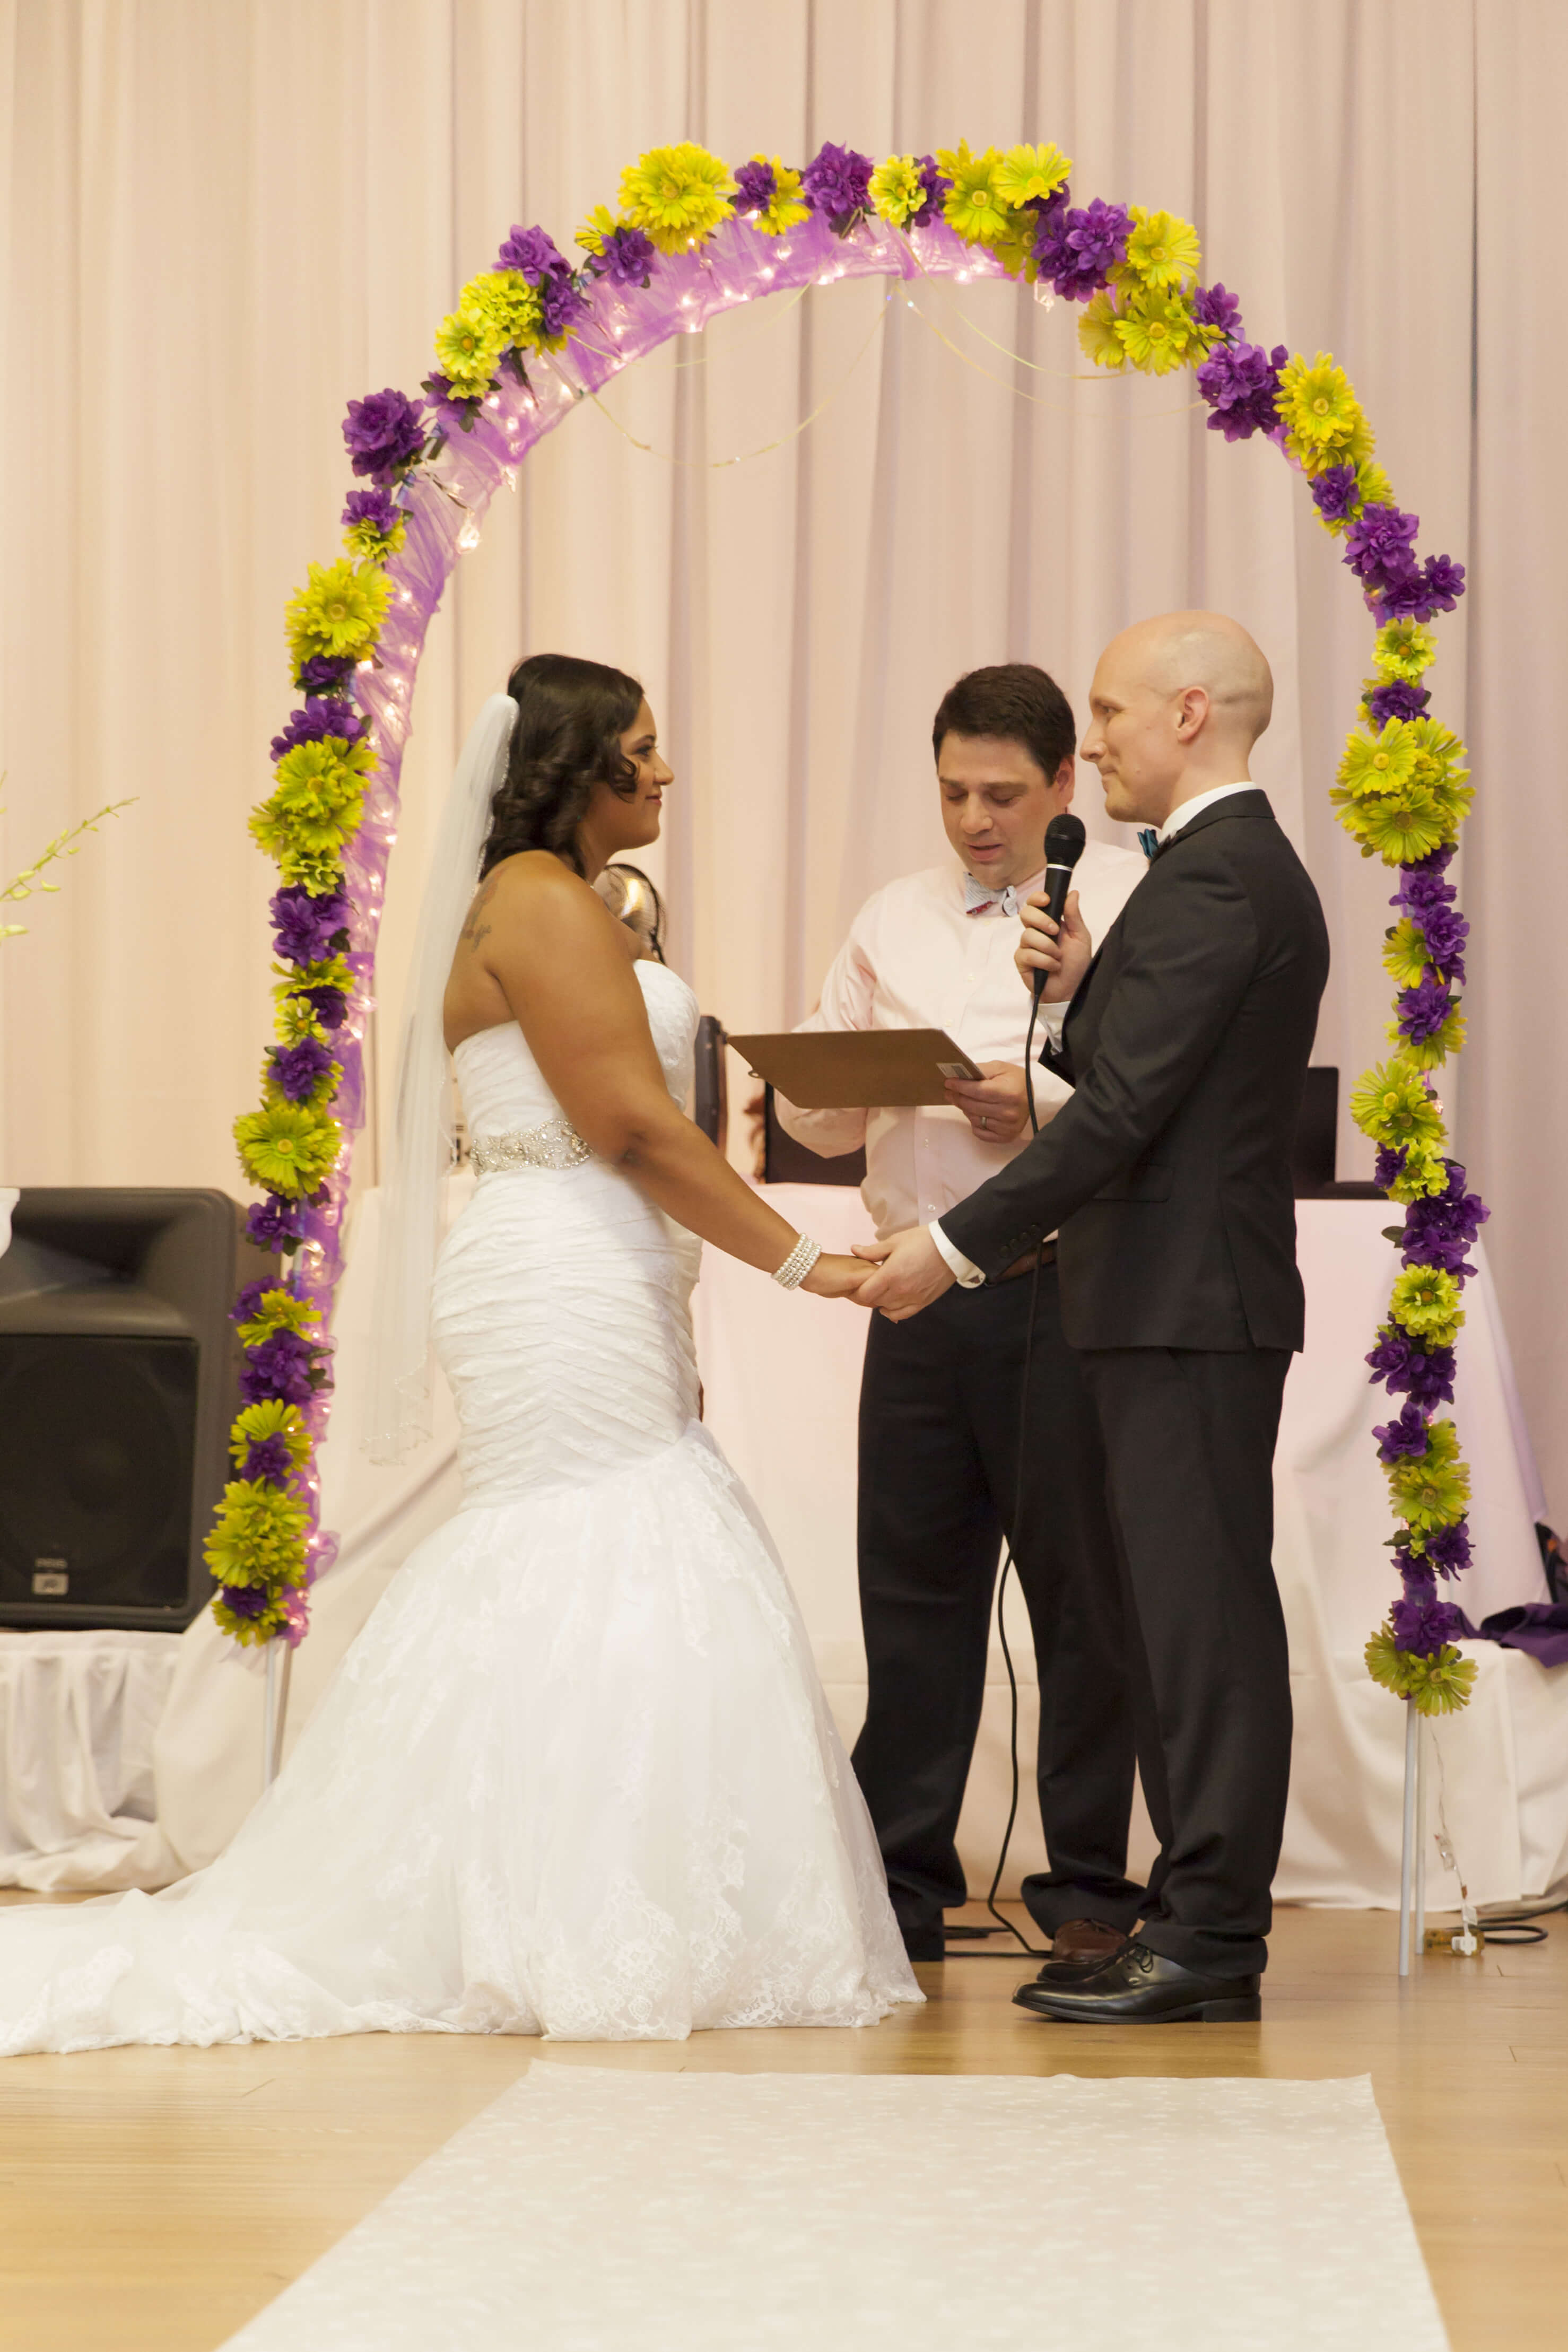 the bride and groom holding hands, facing each other at the aisle with the groom holding a microphone